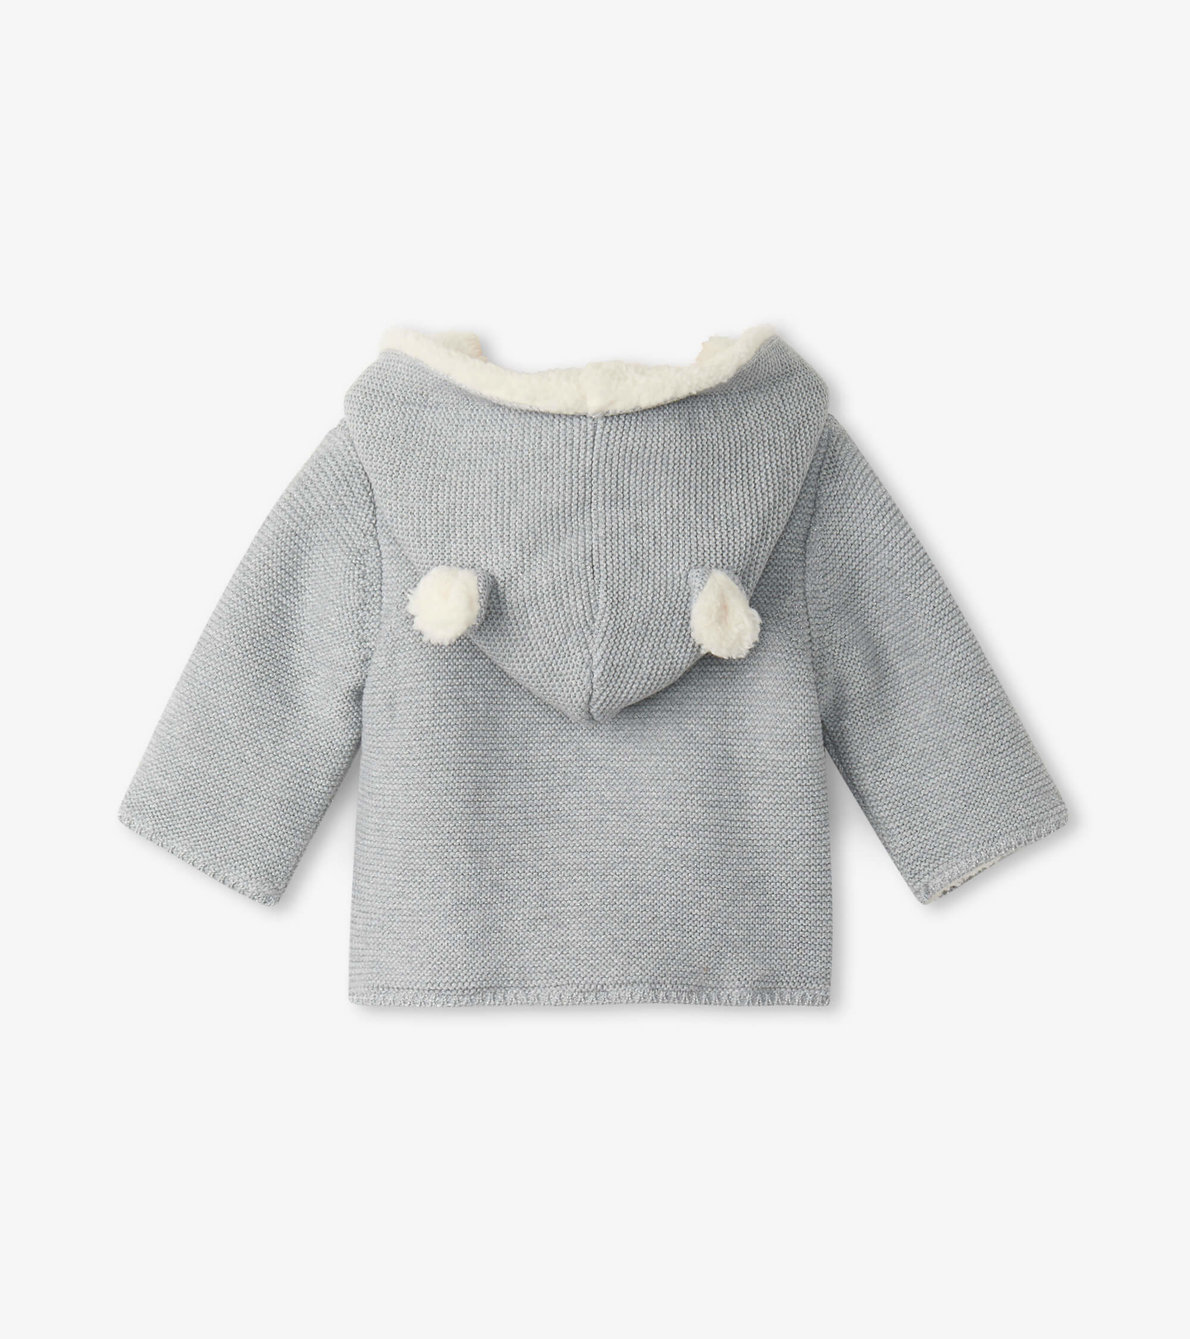 View larger image of Cozy Stars Sherpa Lined Baby Sweater